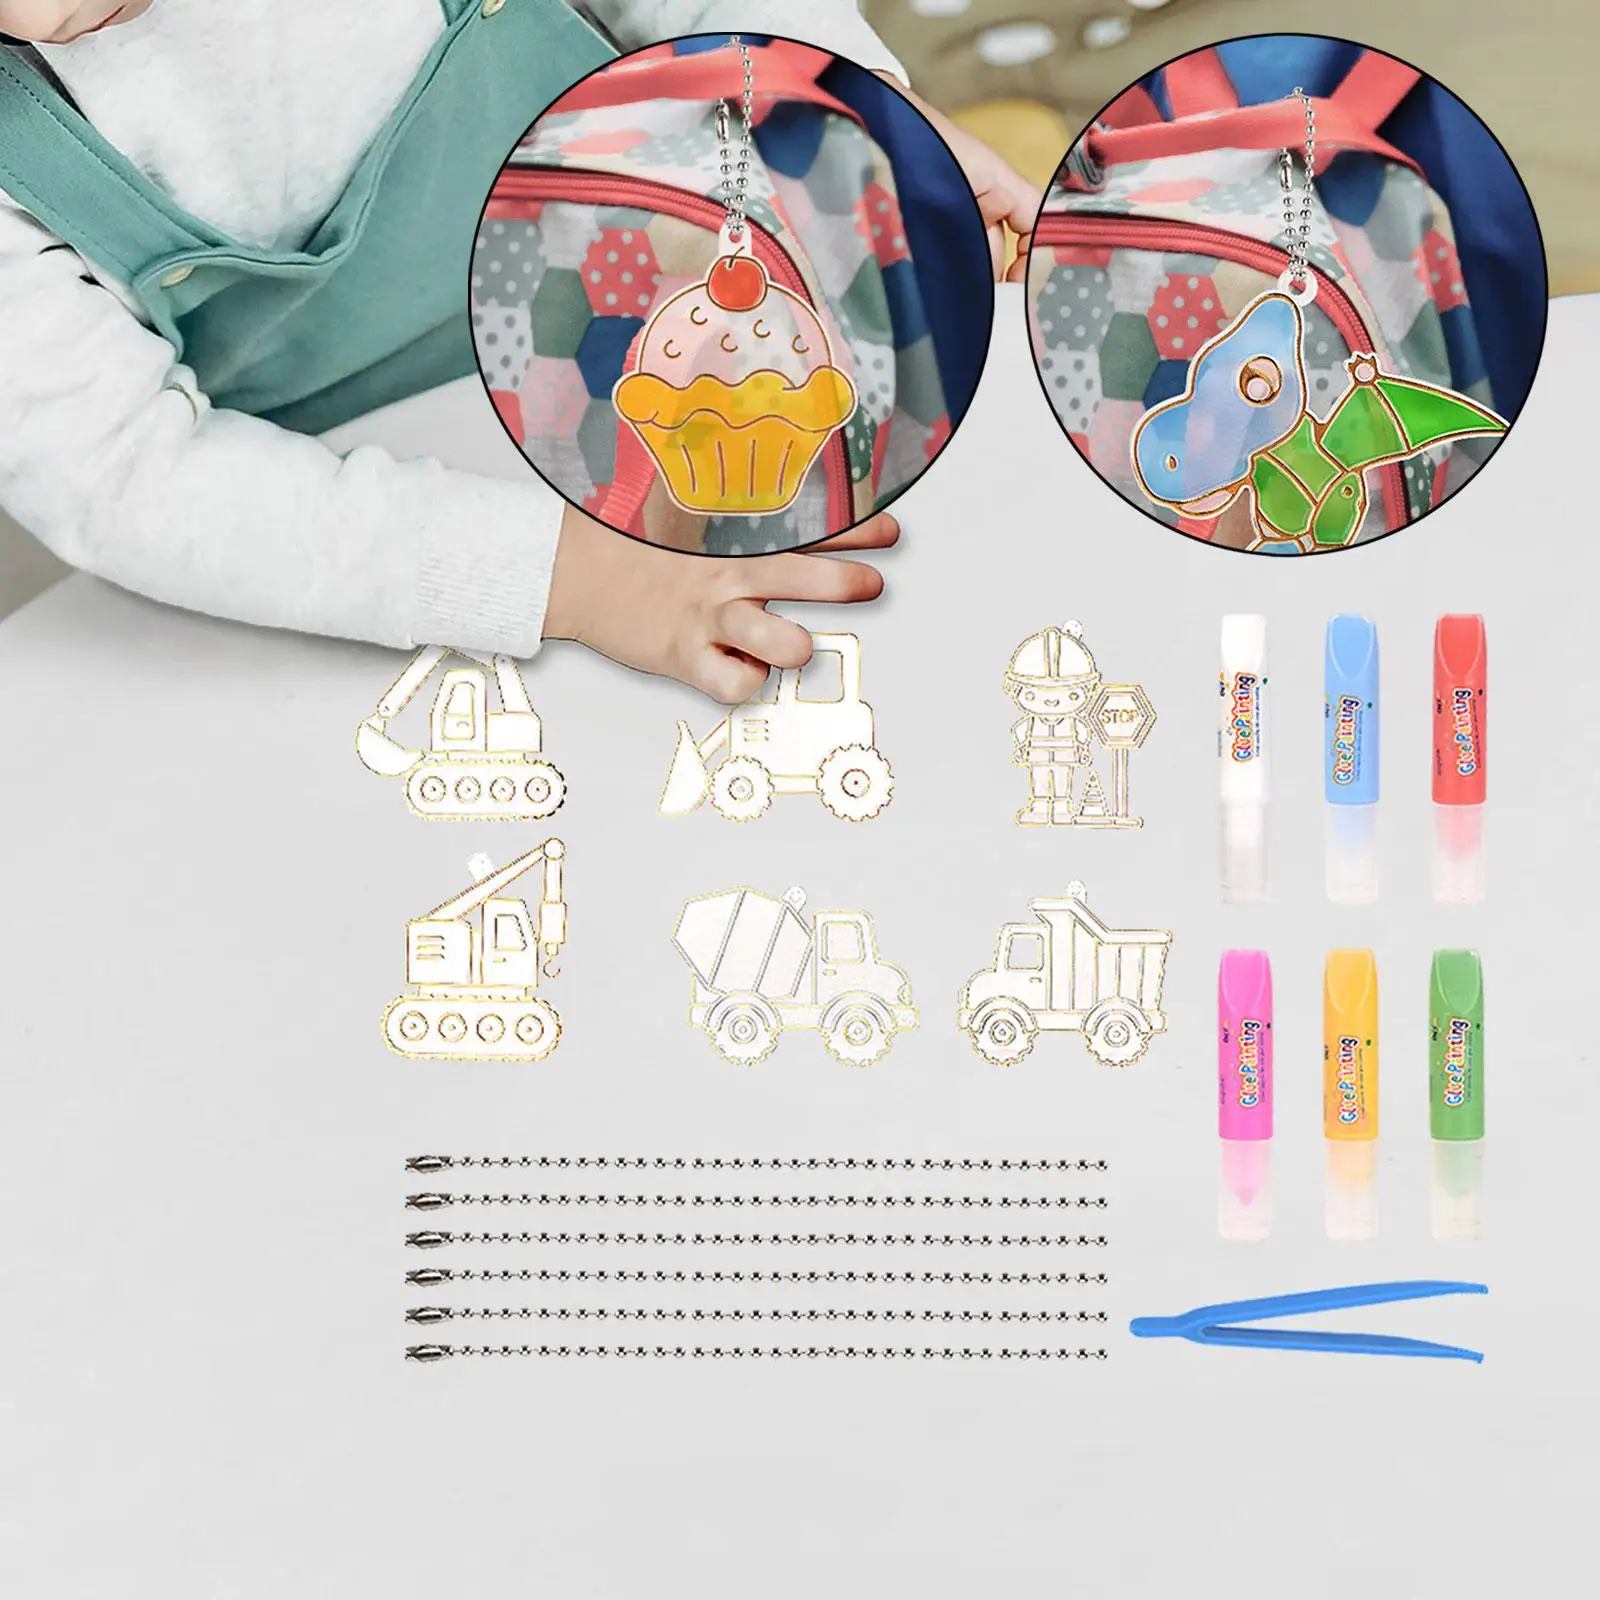 DIY Crystal Paint Arts and Craft Kits Painted Decoration Handmade Drawing Toys for Boys Girls Children Adults Birthday Gifts